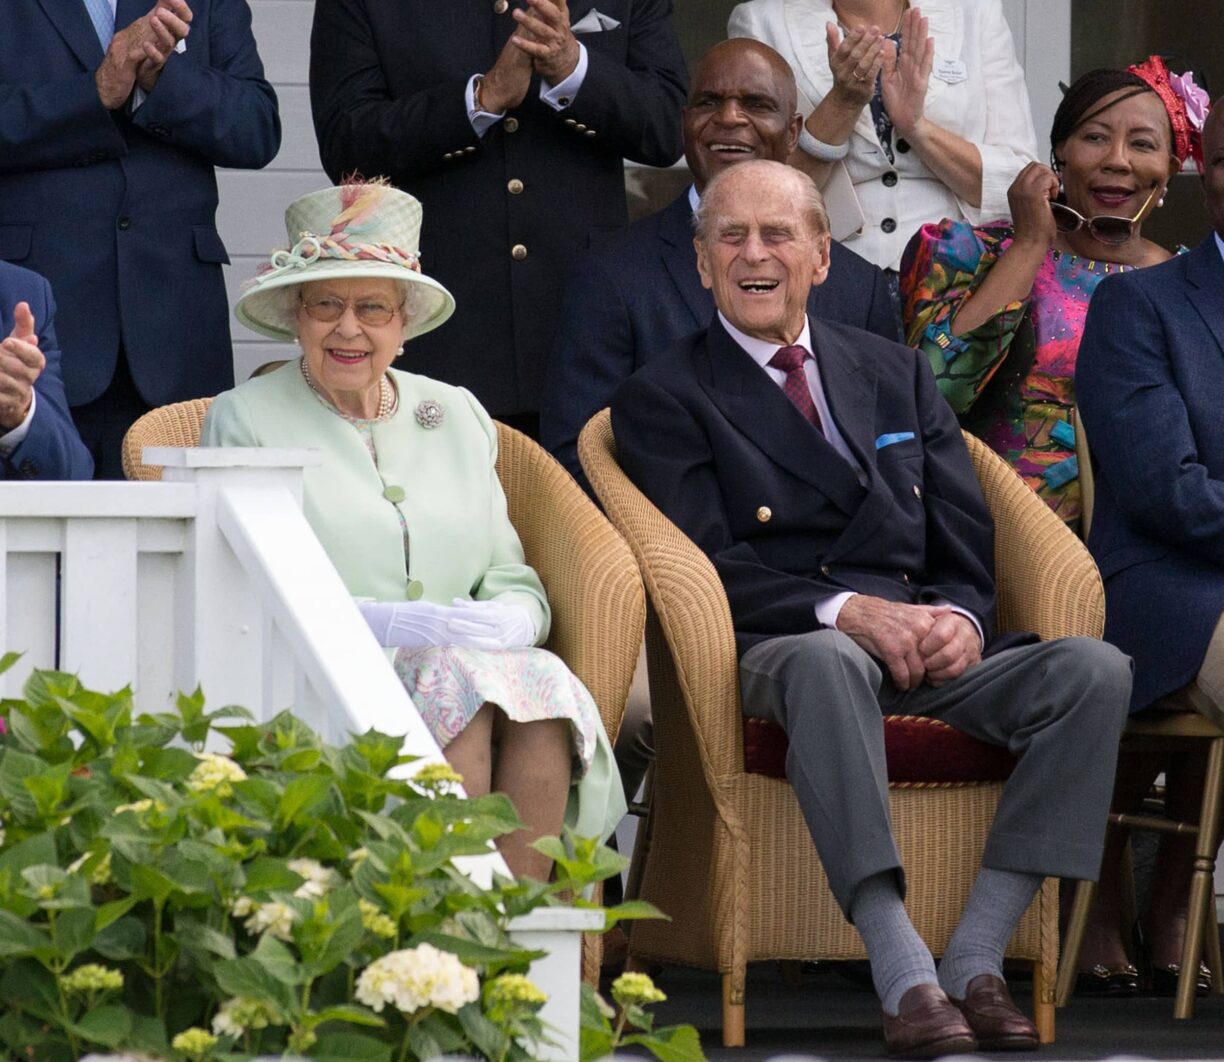 The queen sits next to the duke of edinburgh